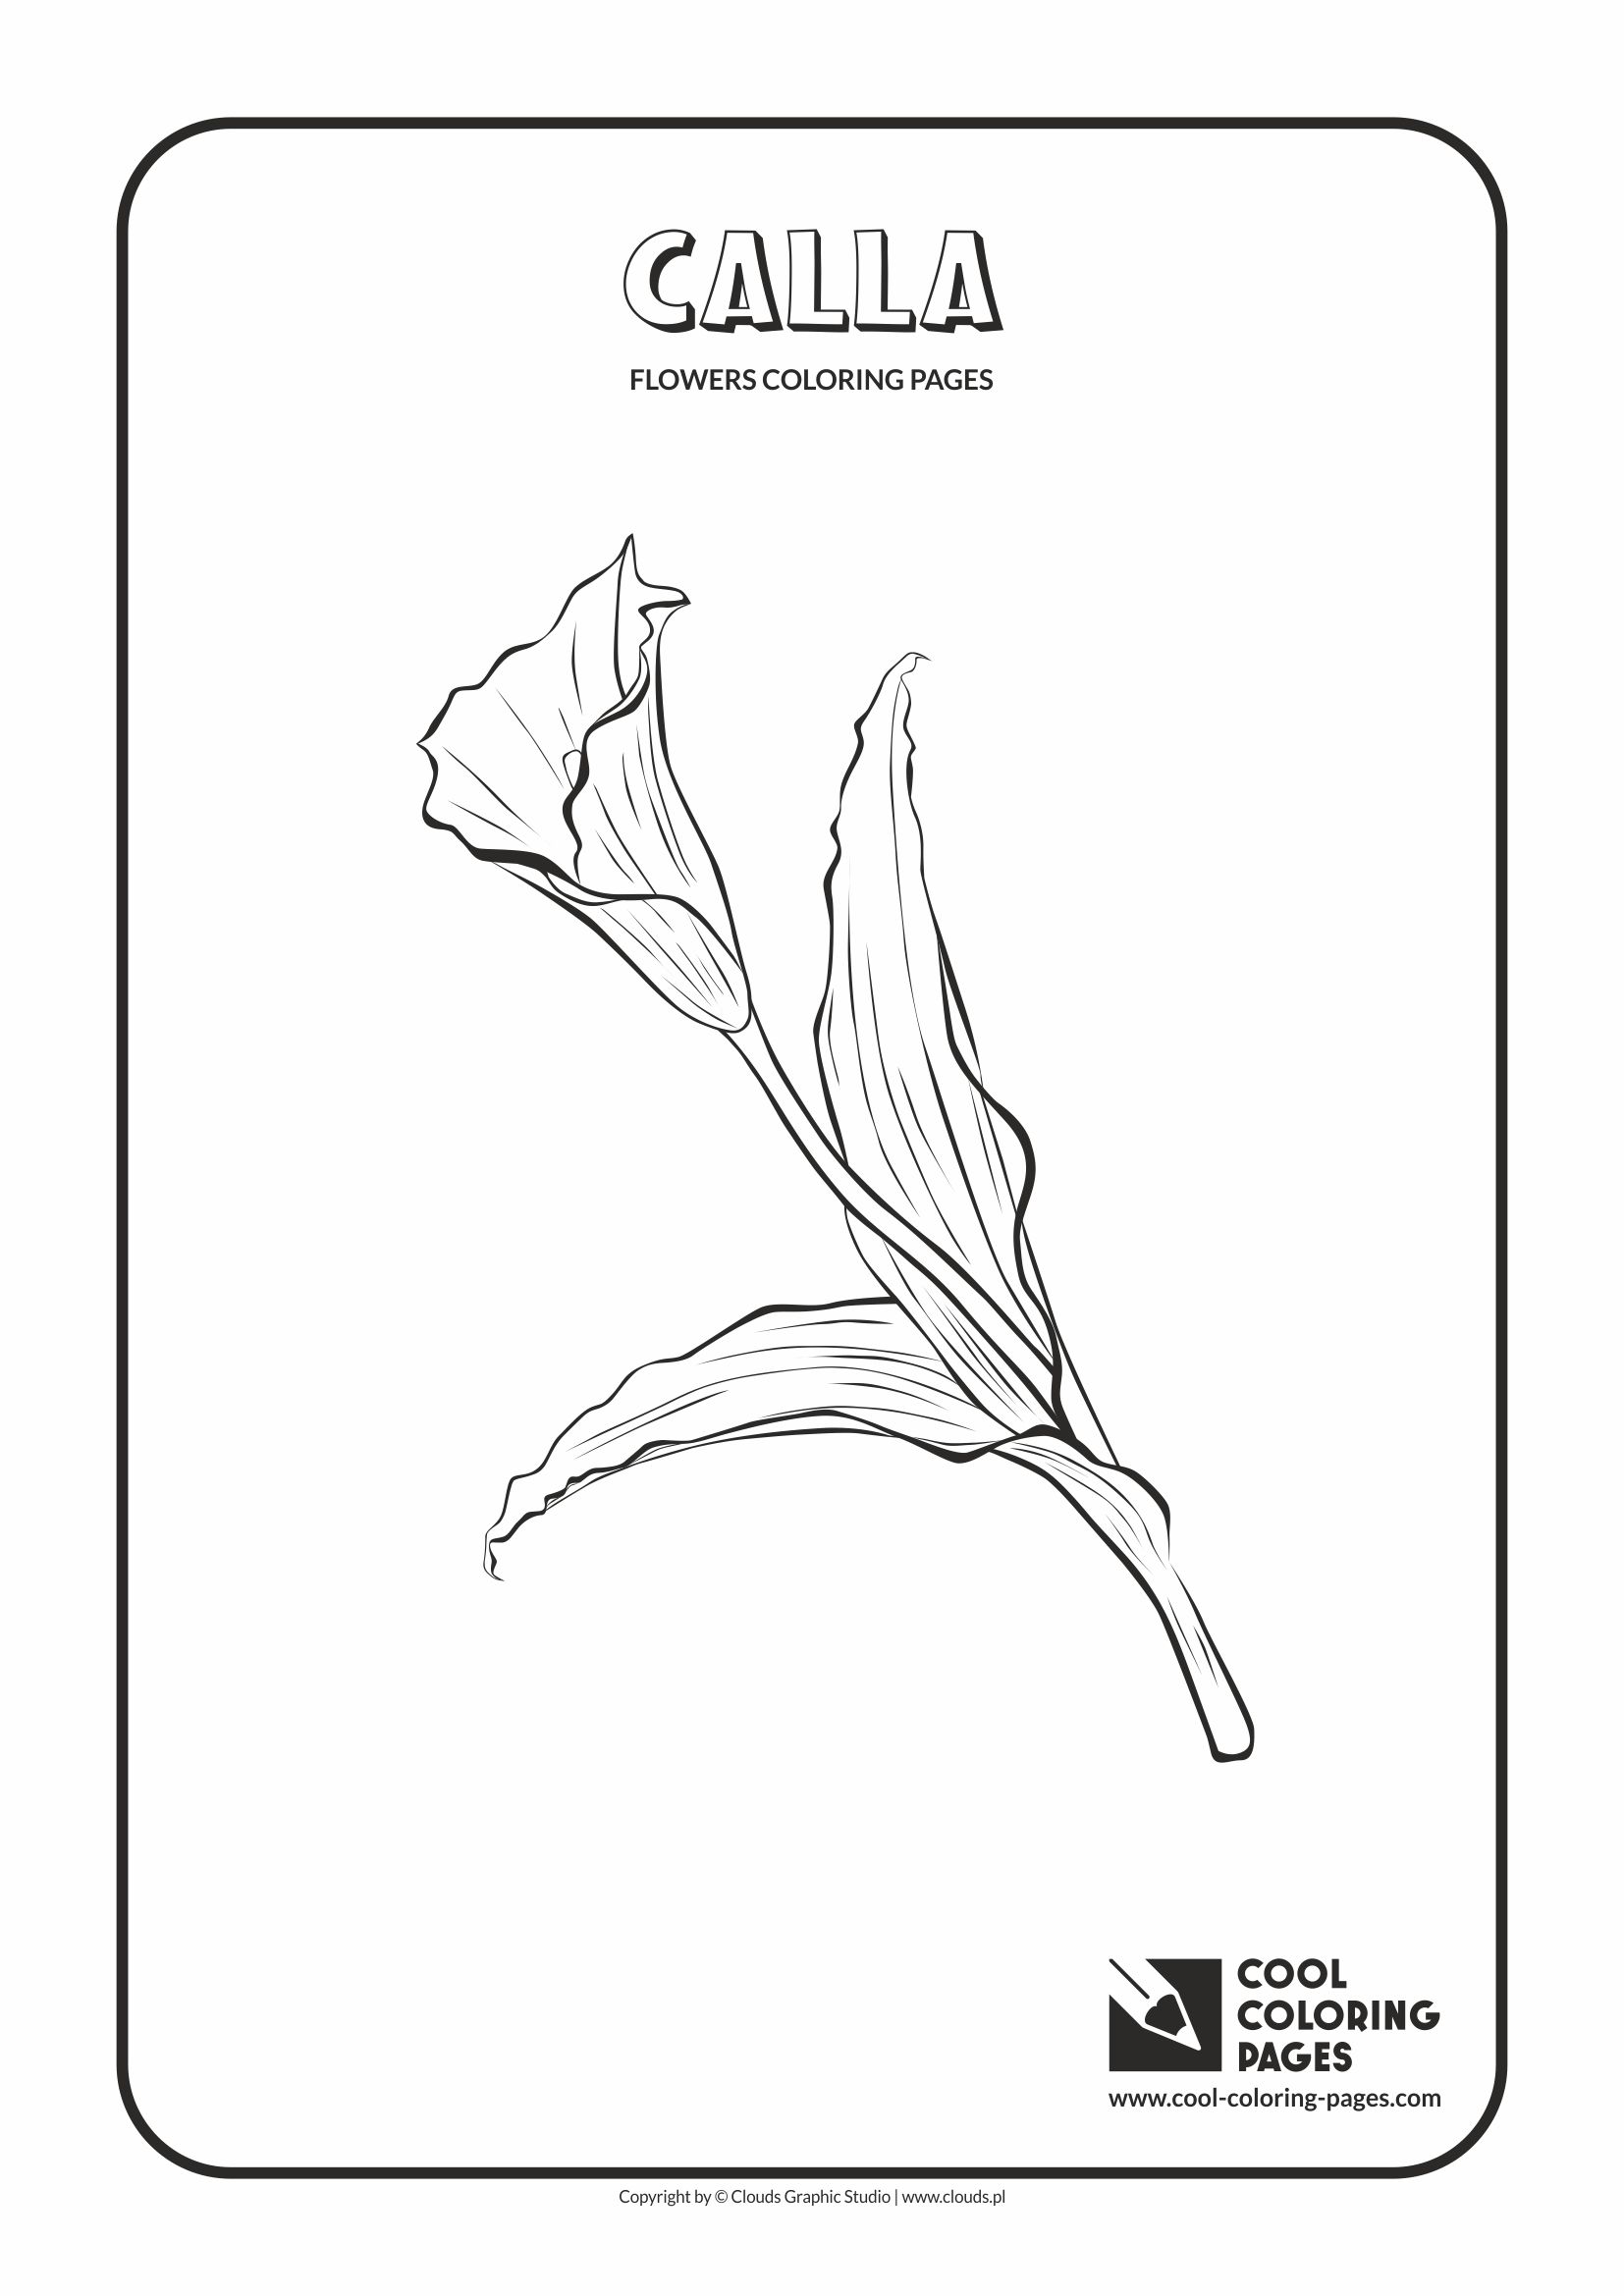 Cool Coloring Pages - Plants / Calla / Coloring page with calla